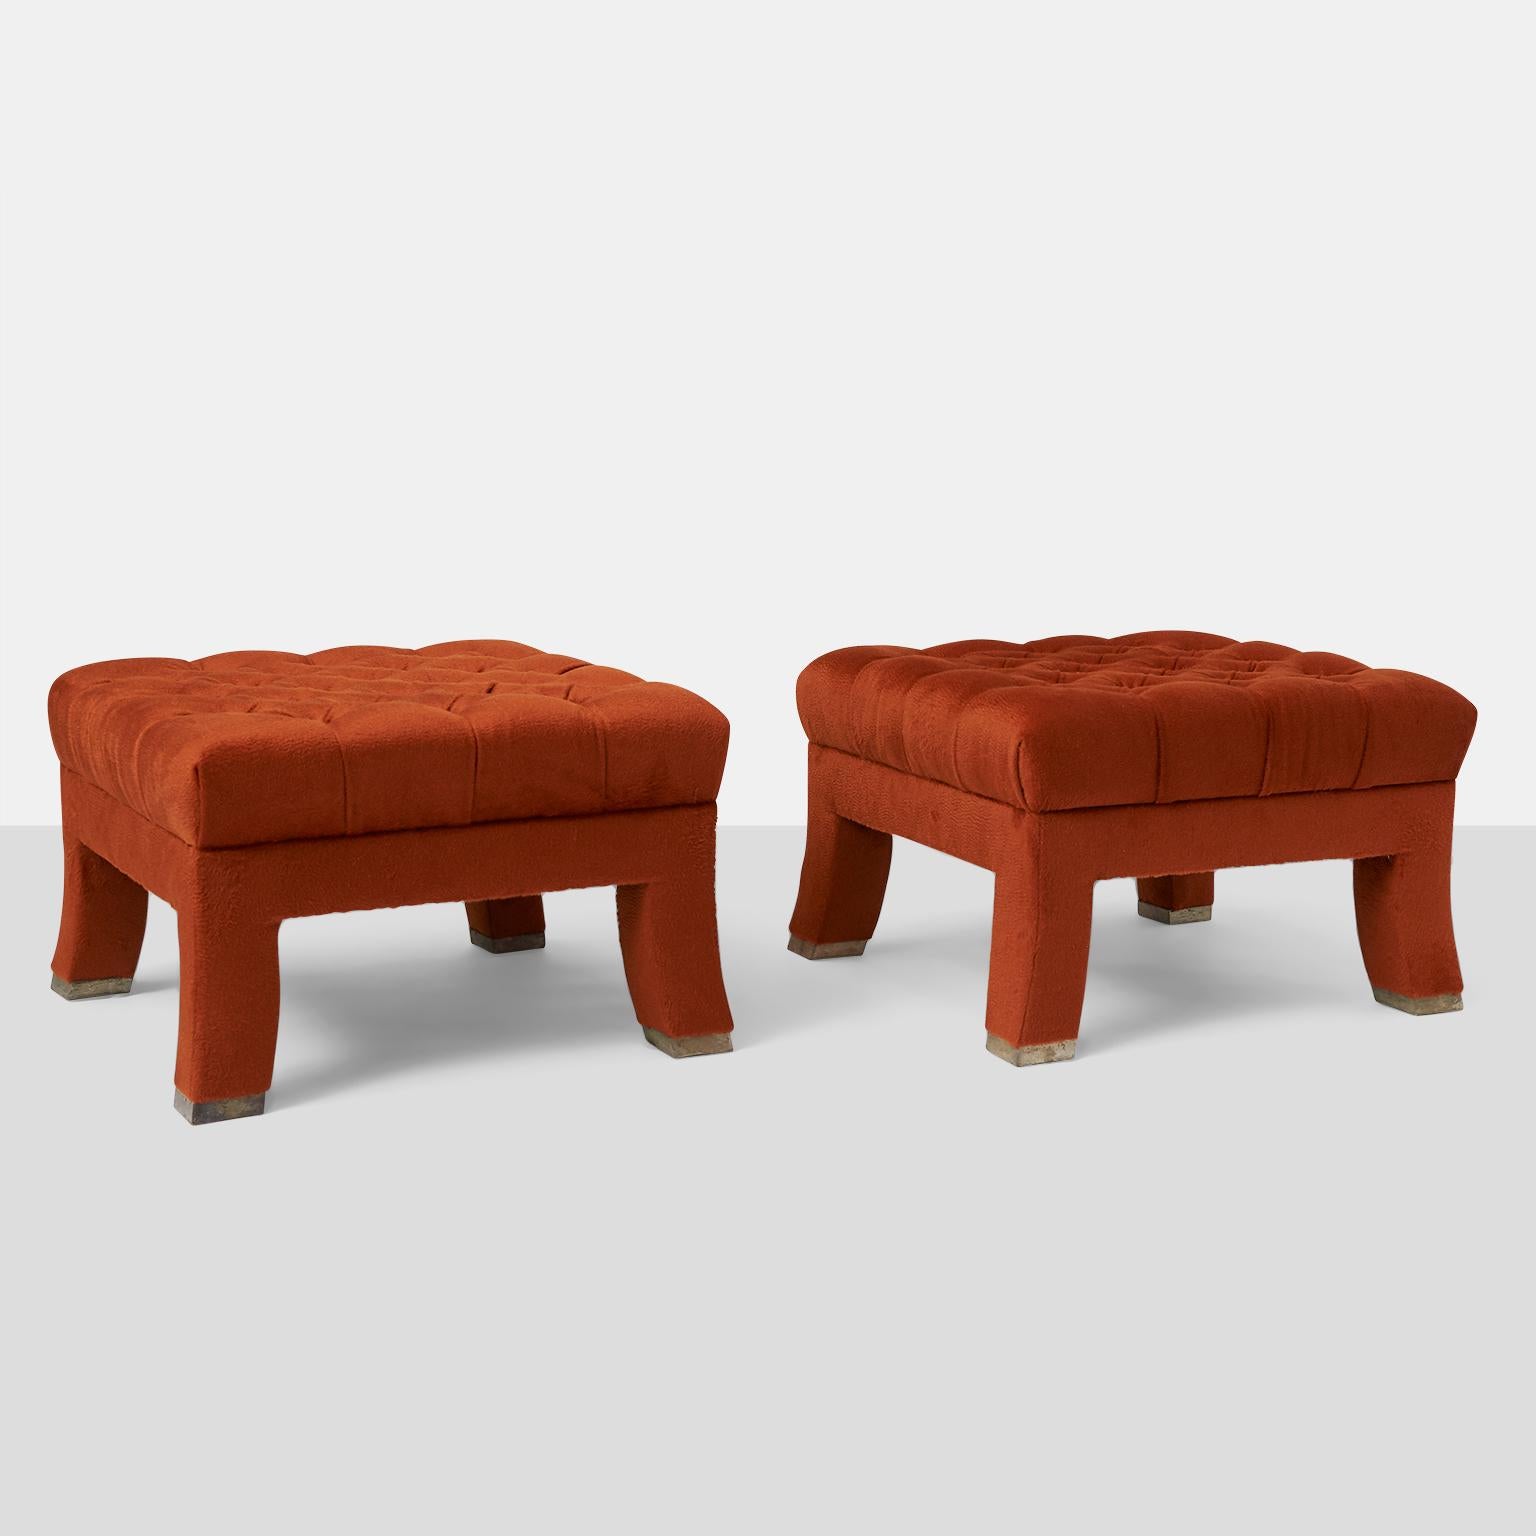 A pair of tufted 